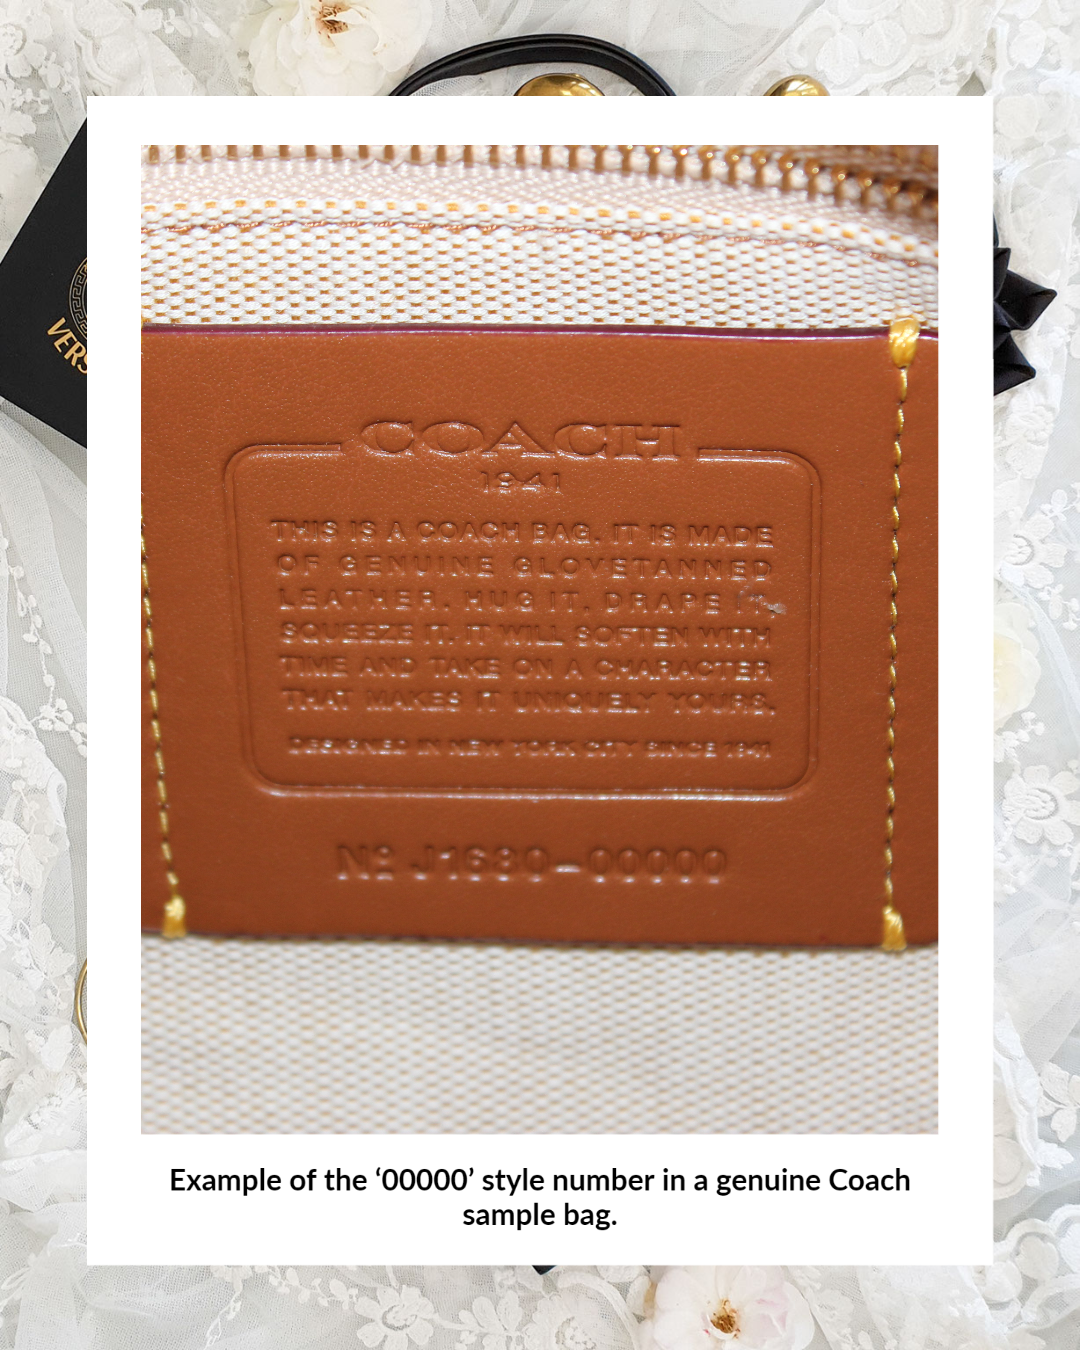 Coach- Dating Bags Using The Serial Numbers- Part 2